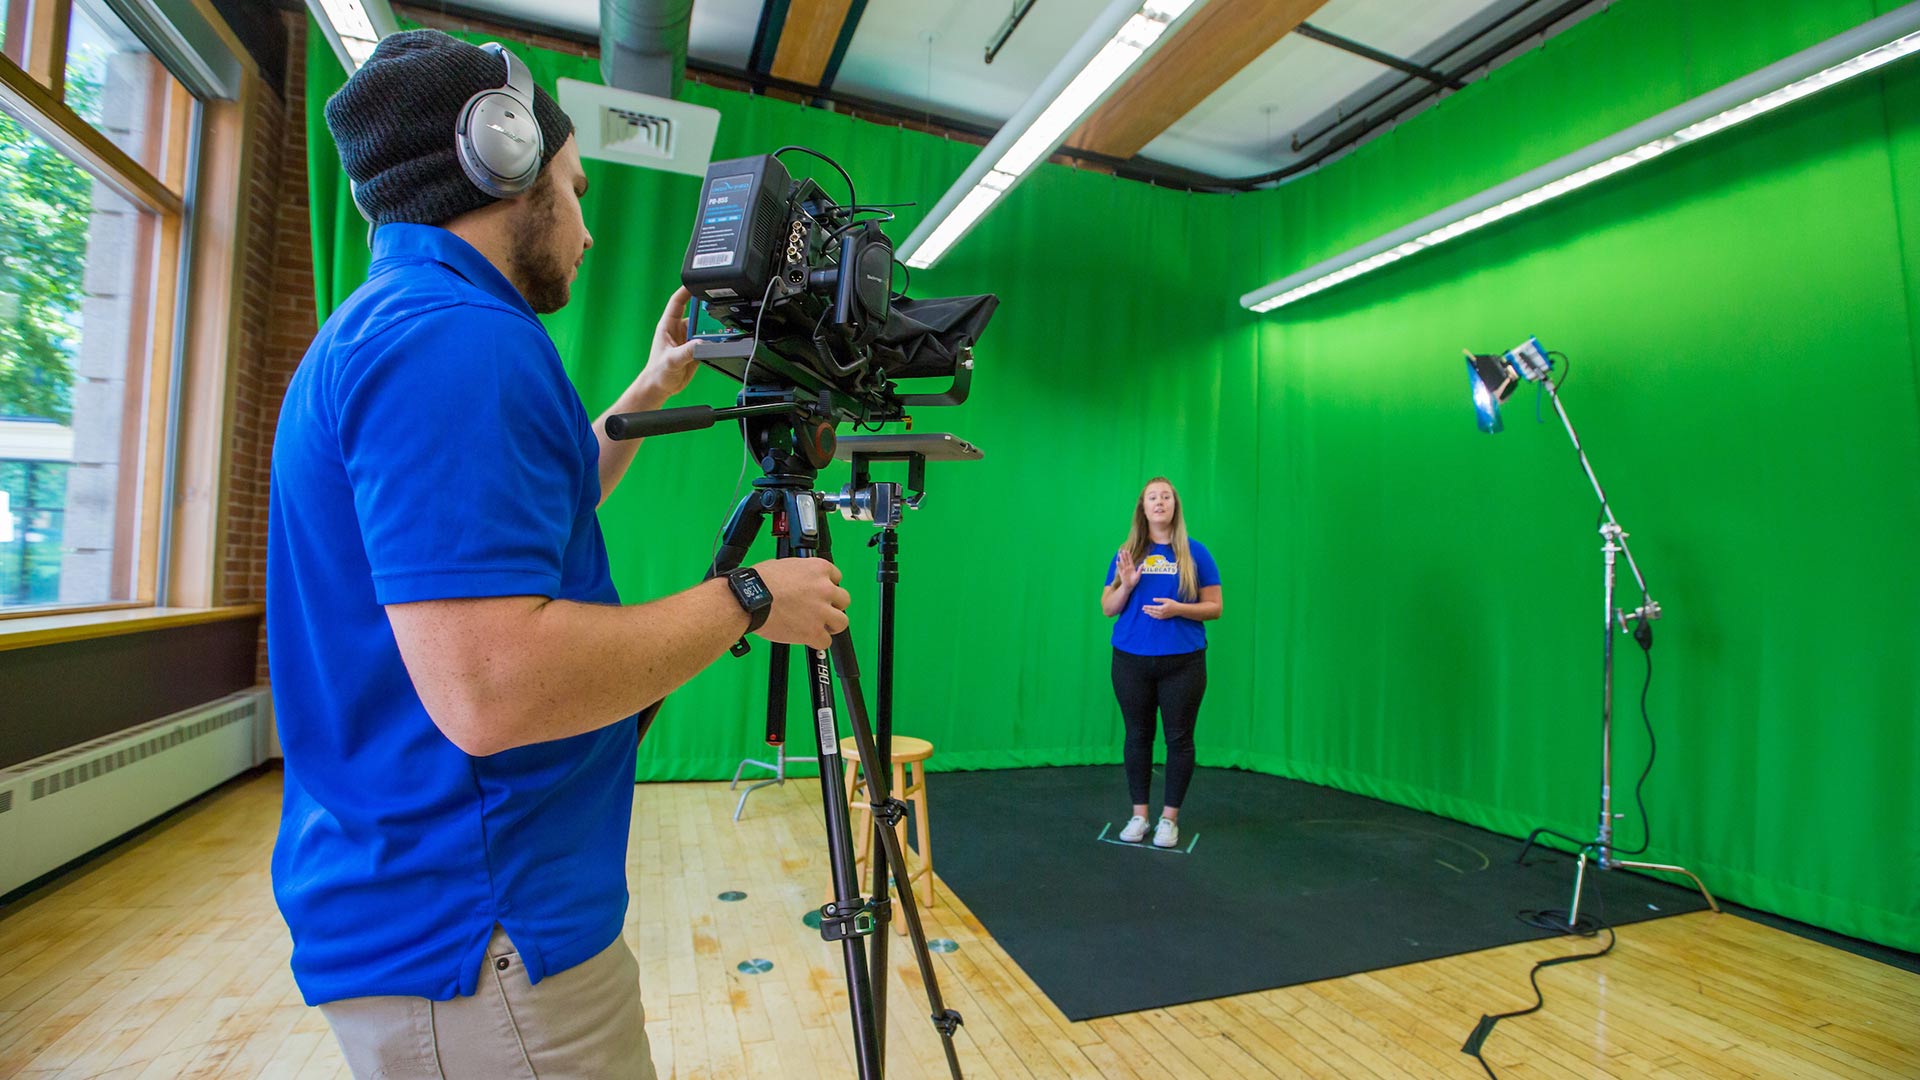 JWU students at work in the media production studio on campus.